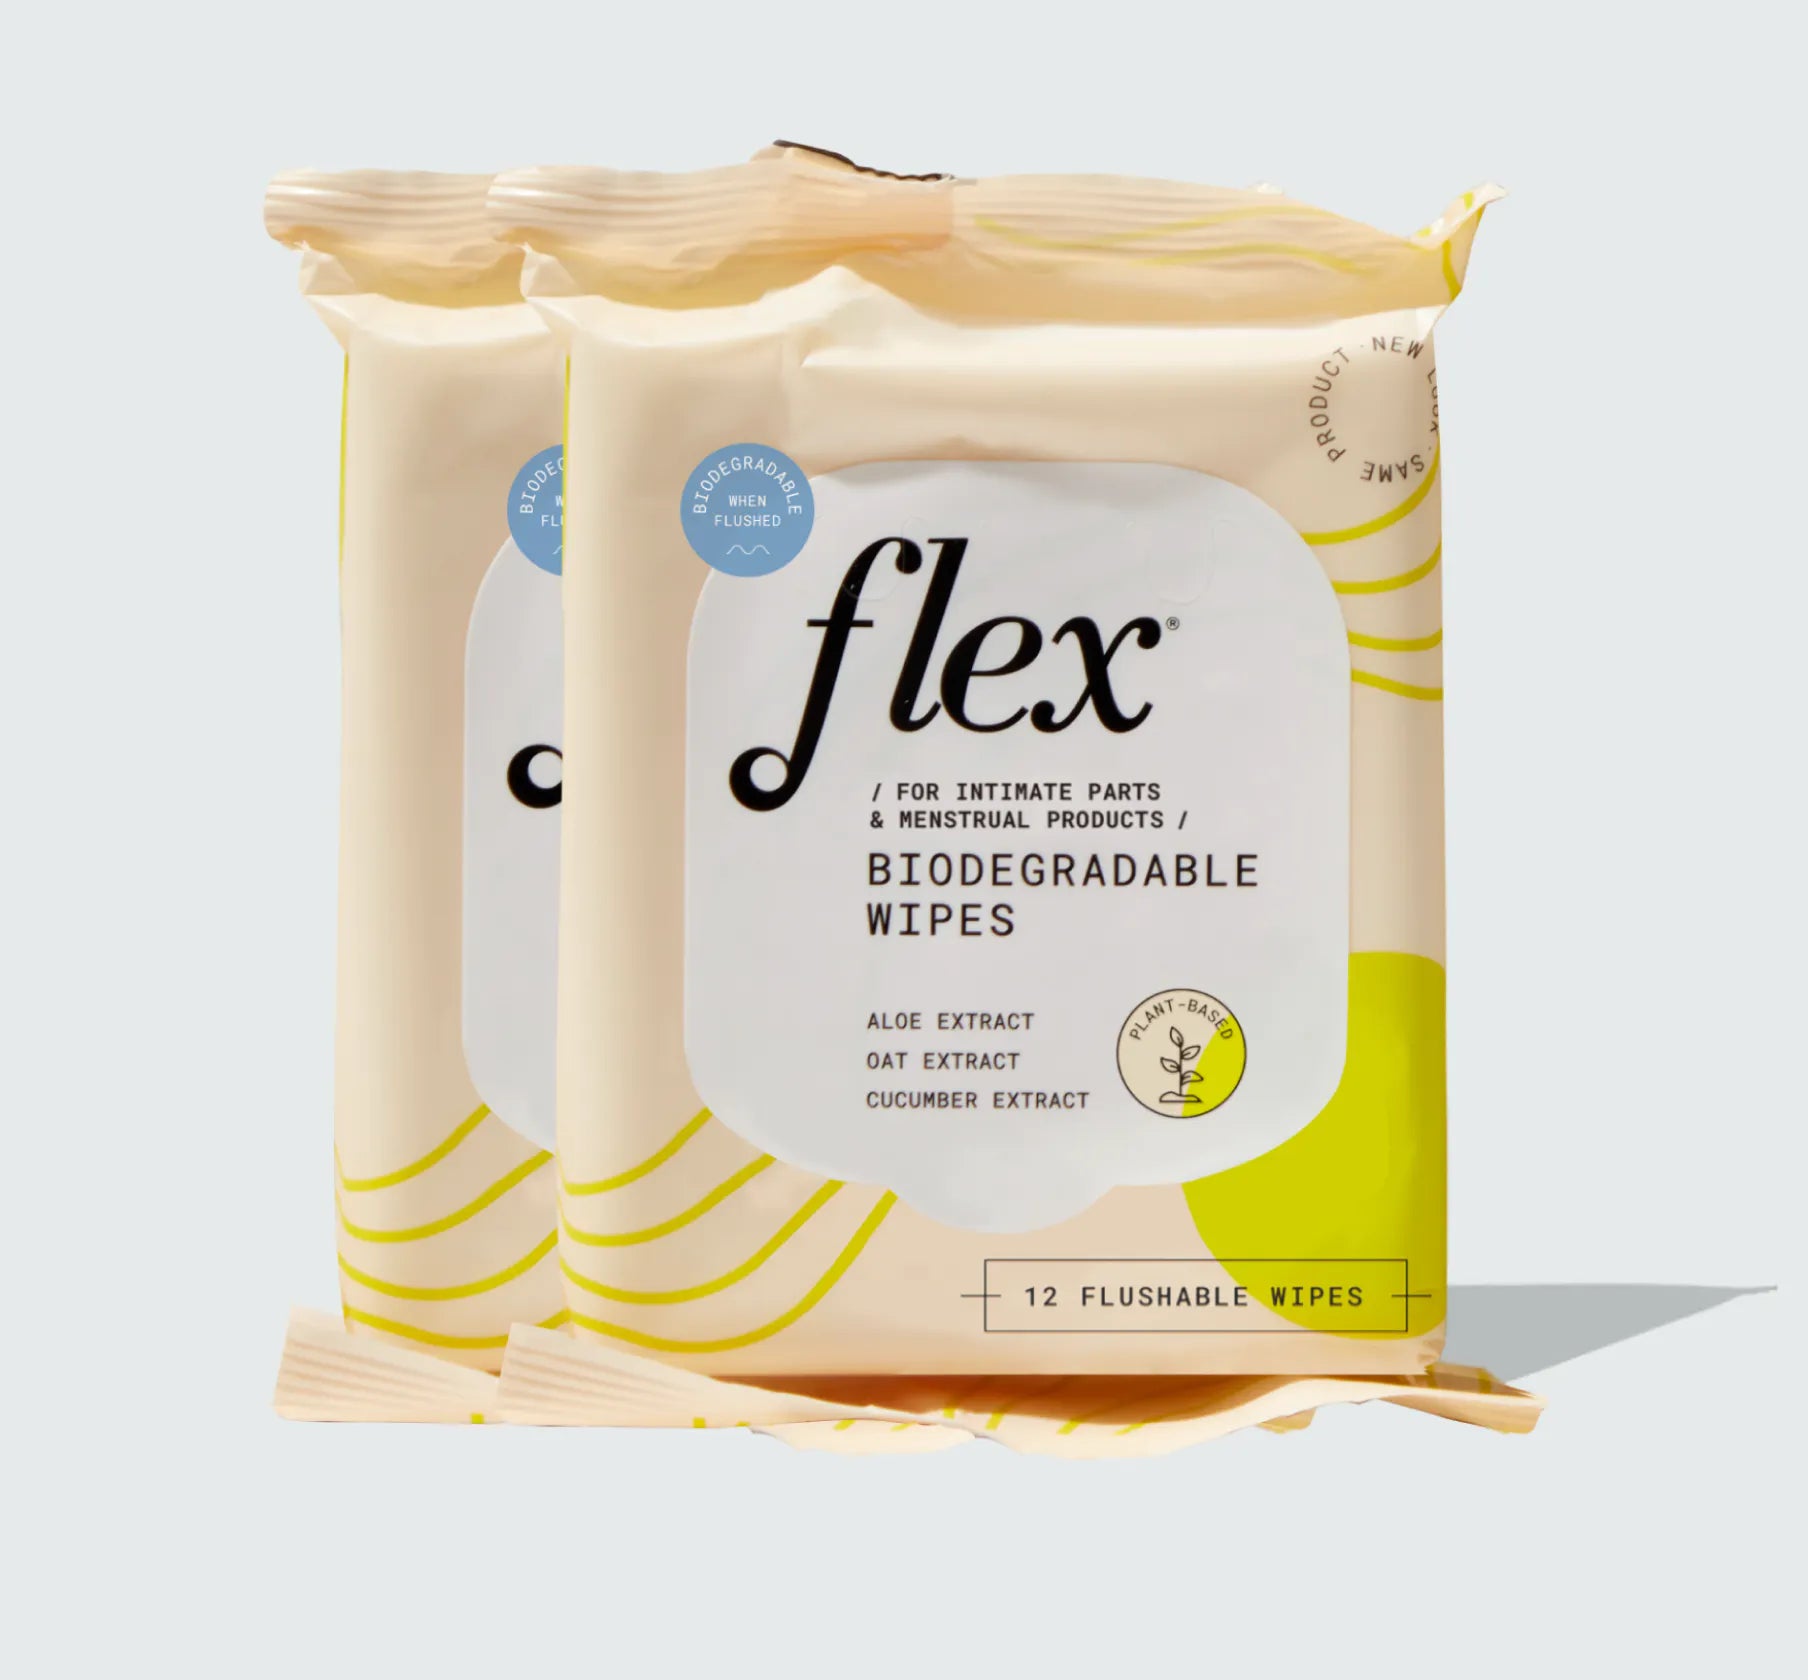 Flex biodegradable wipes for body and period products